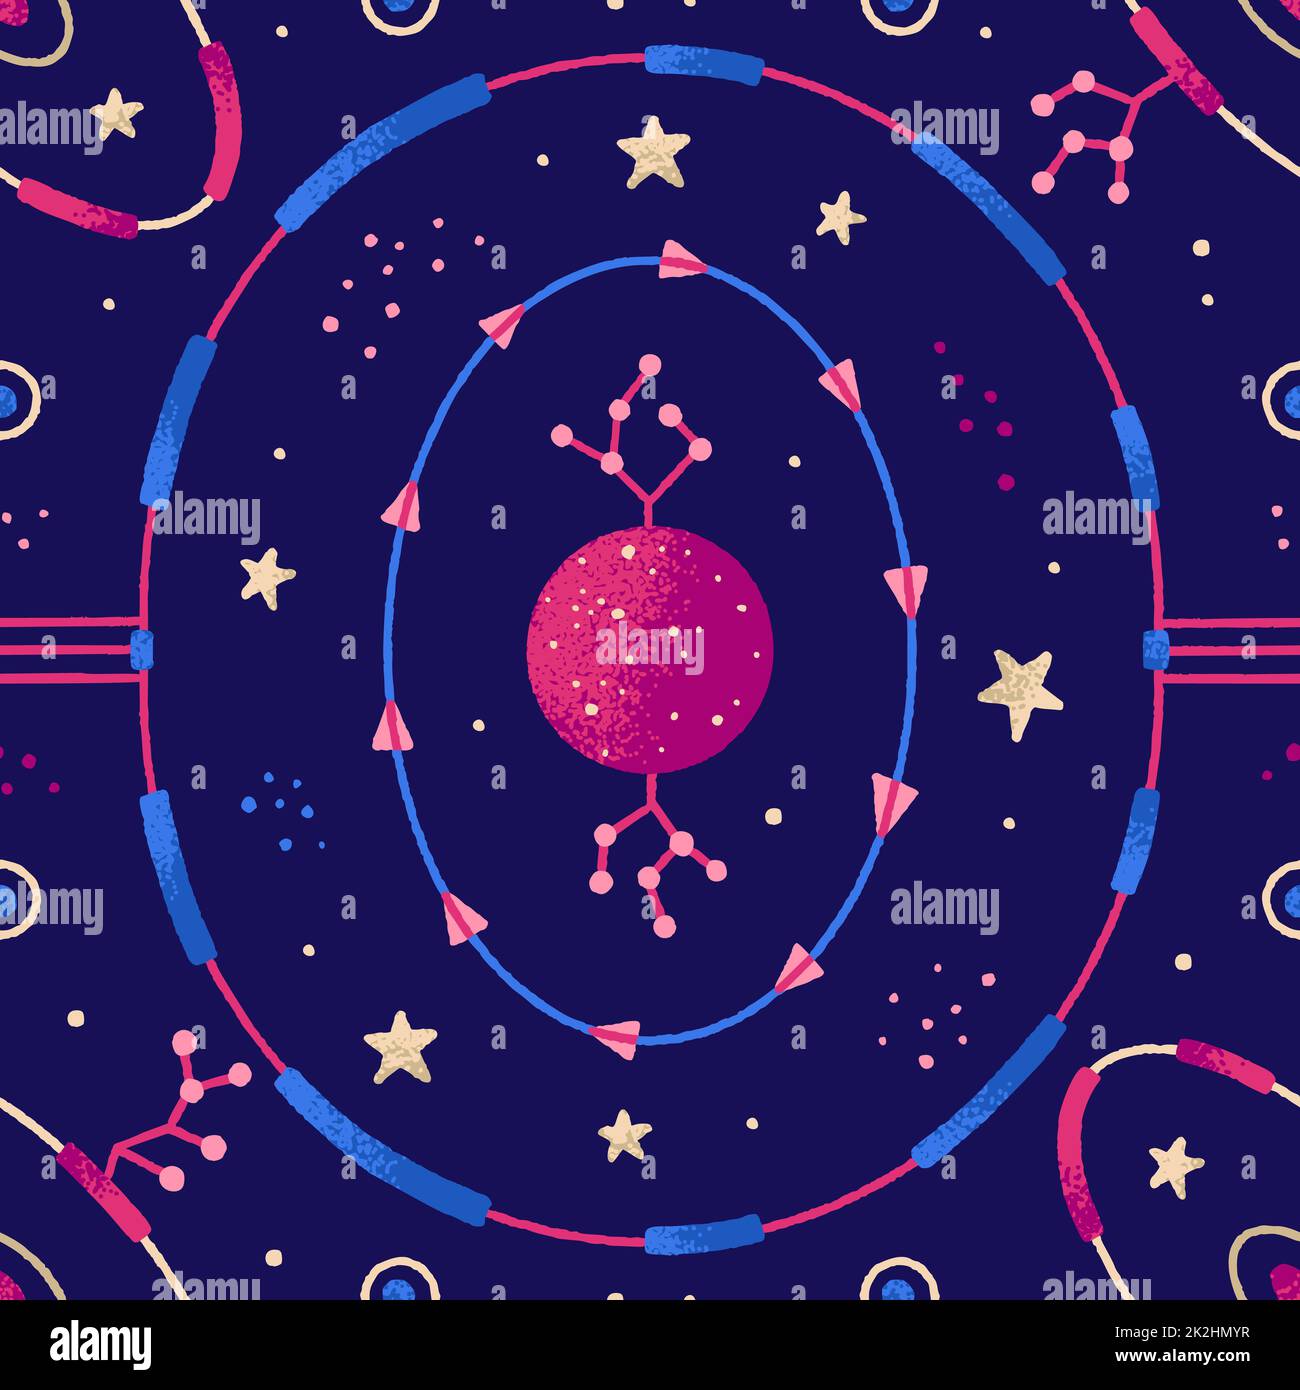 Space seamless patterns of planet, stars, other celestial bodies. Vector illustration Stock Photo